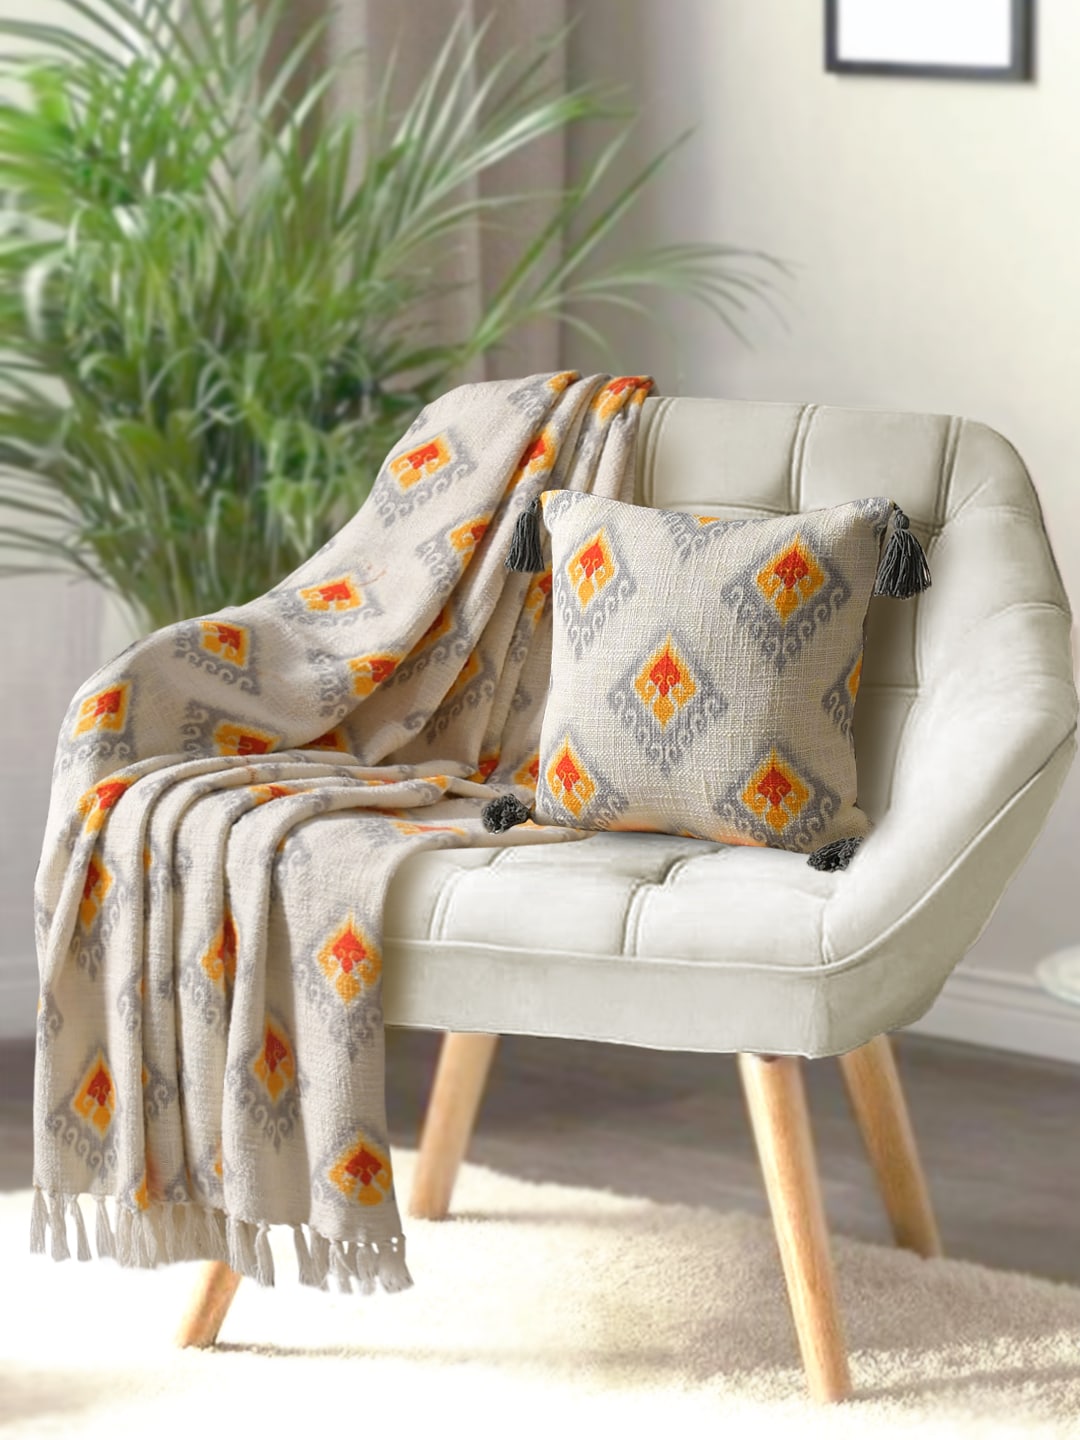 Blanc9 Roshni Cotton Printed Throw with Cushion Cover